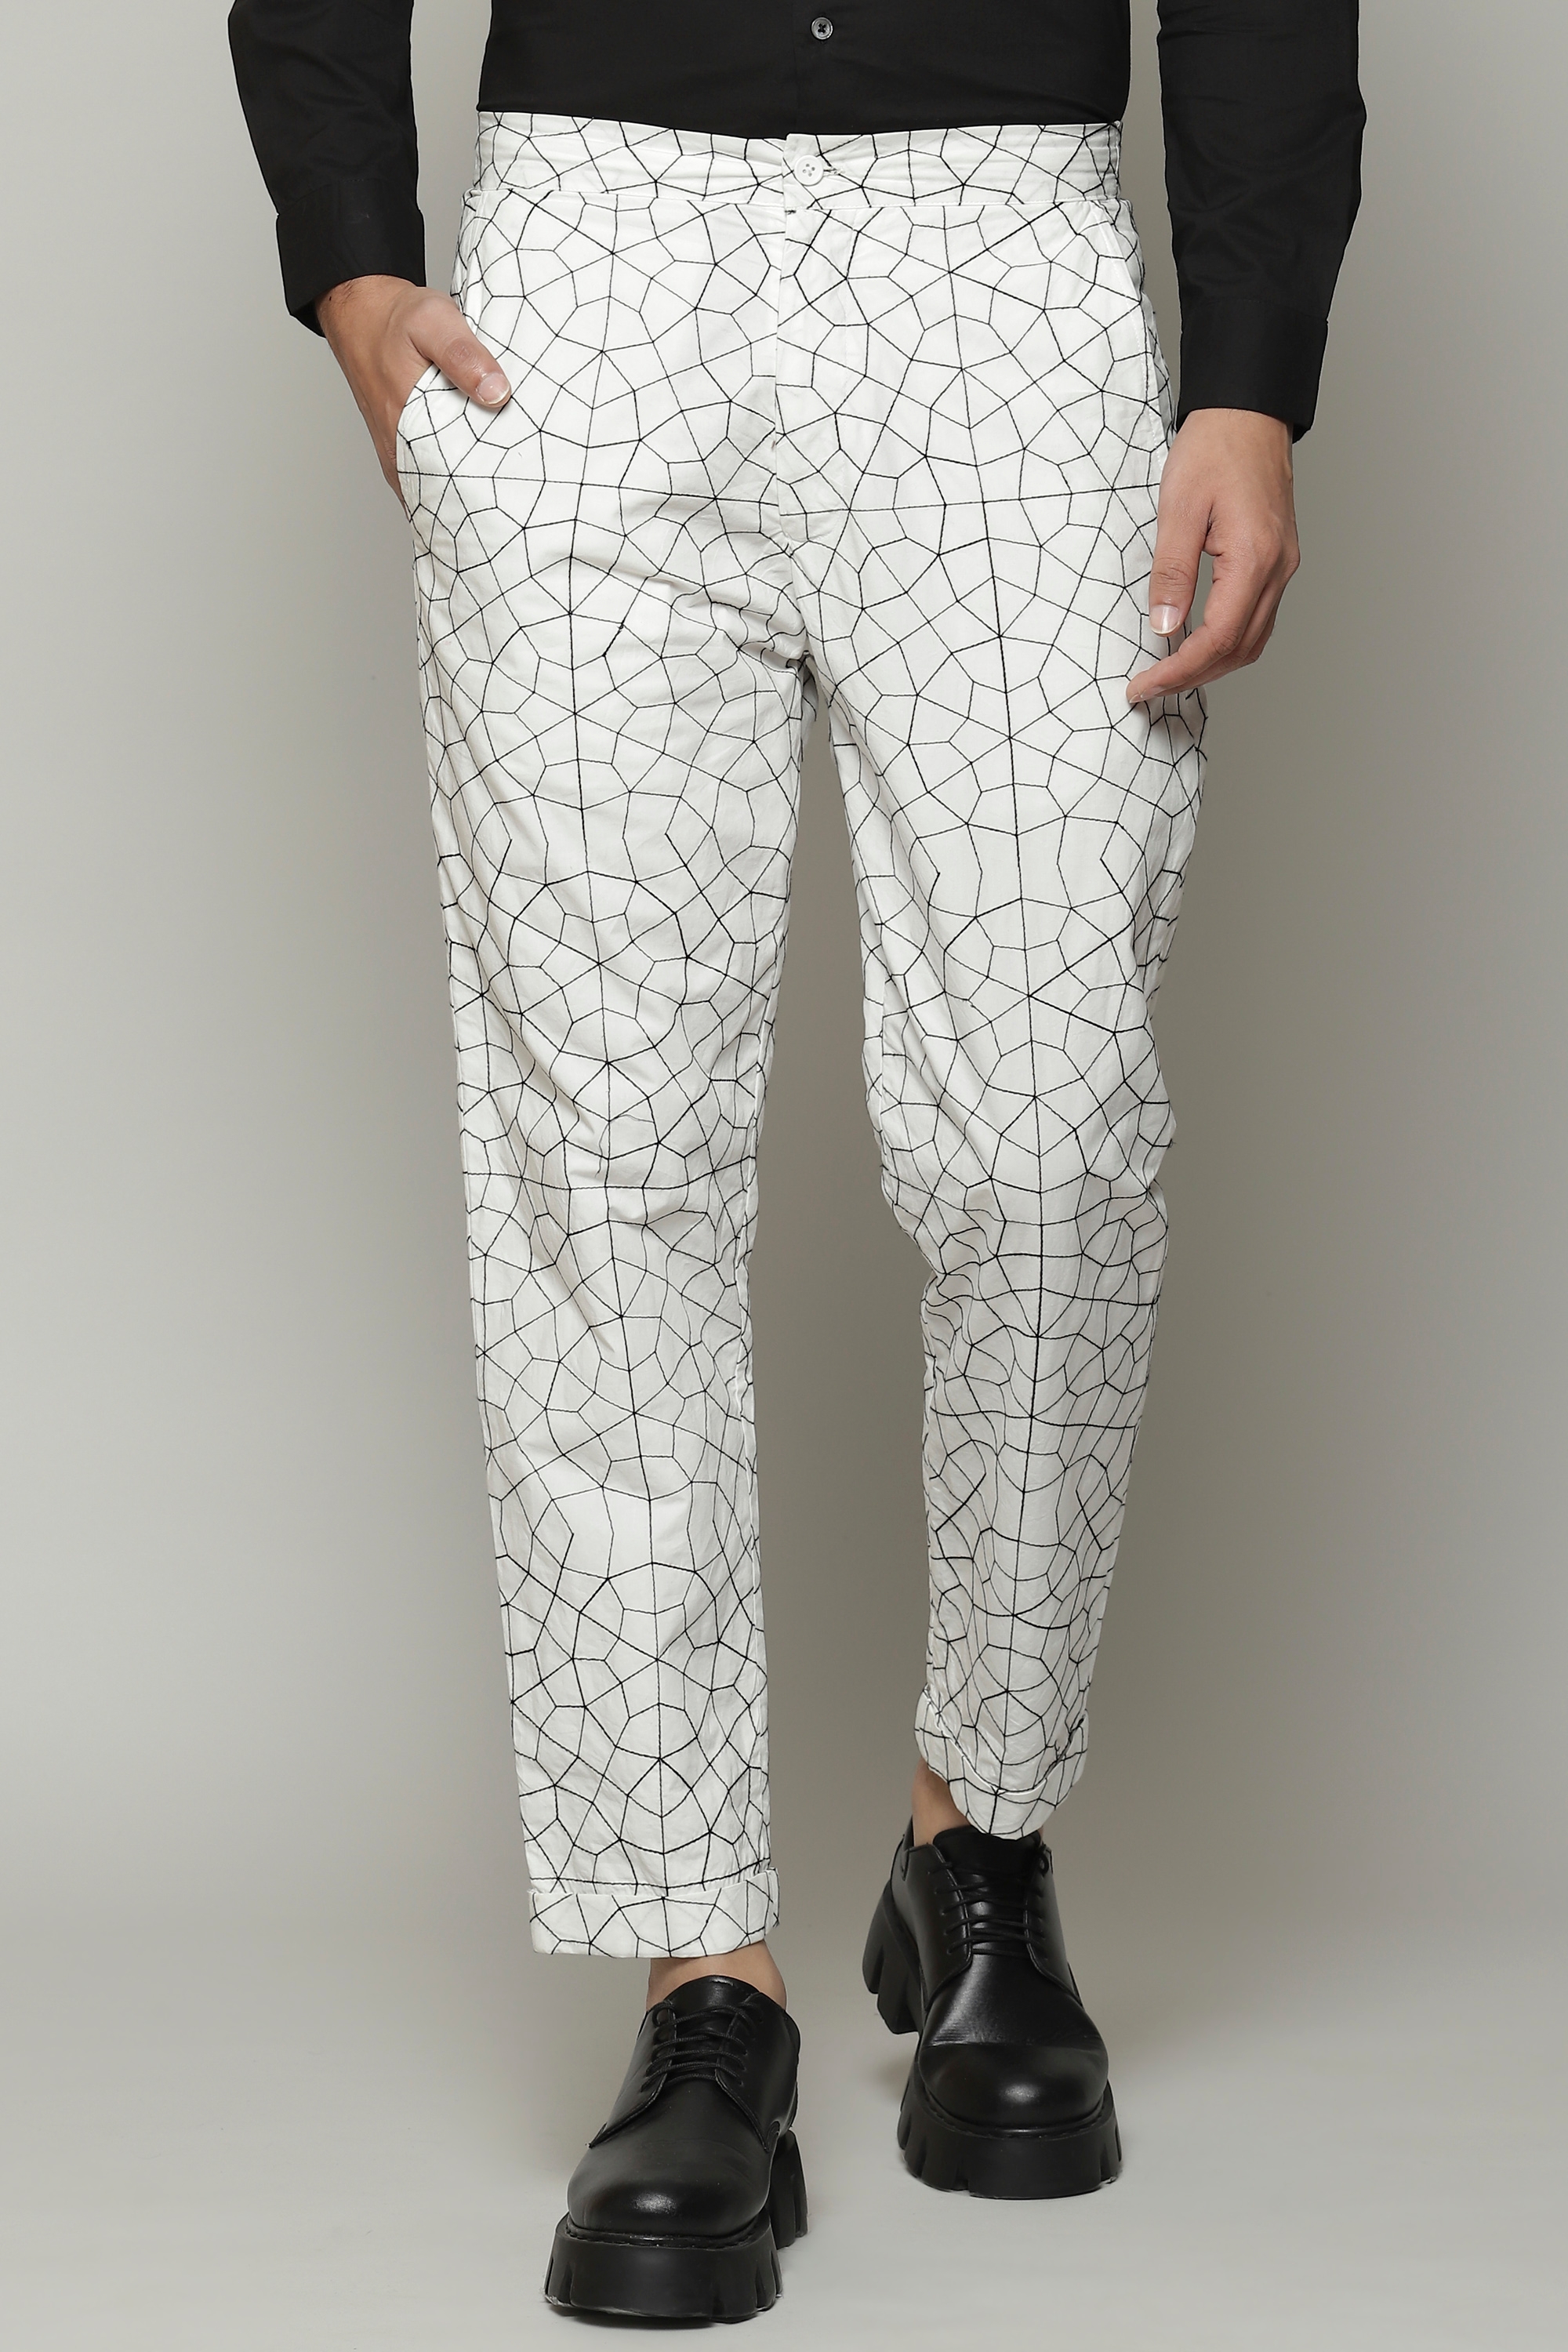 ABRAHAM AND THAKORE | Jali Embroidered Cotton Poplin Trouser Black-Ivory